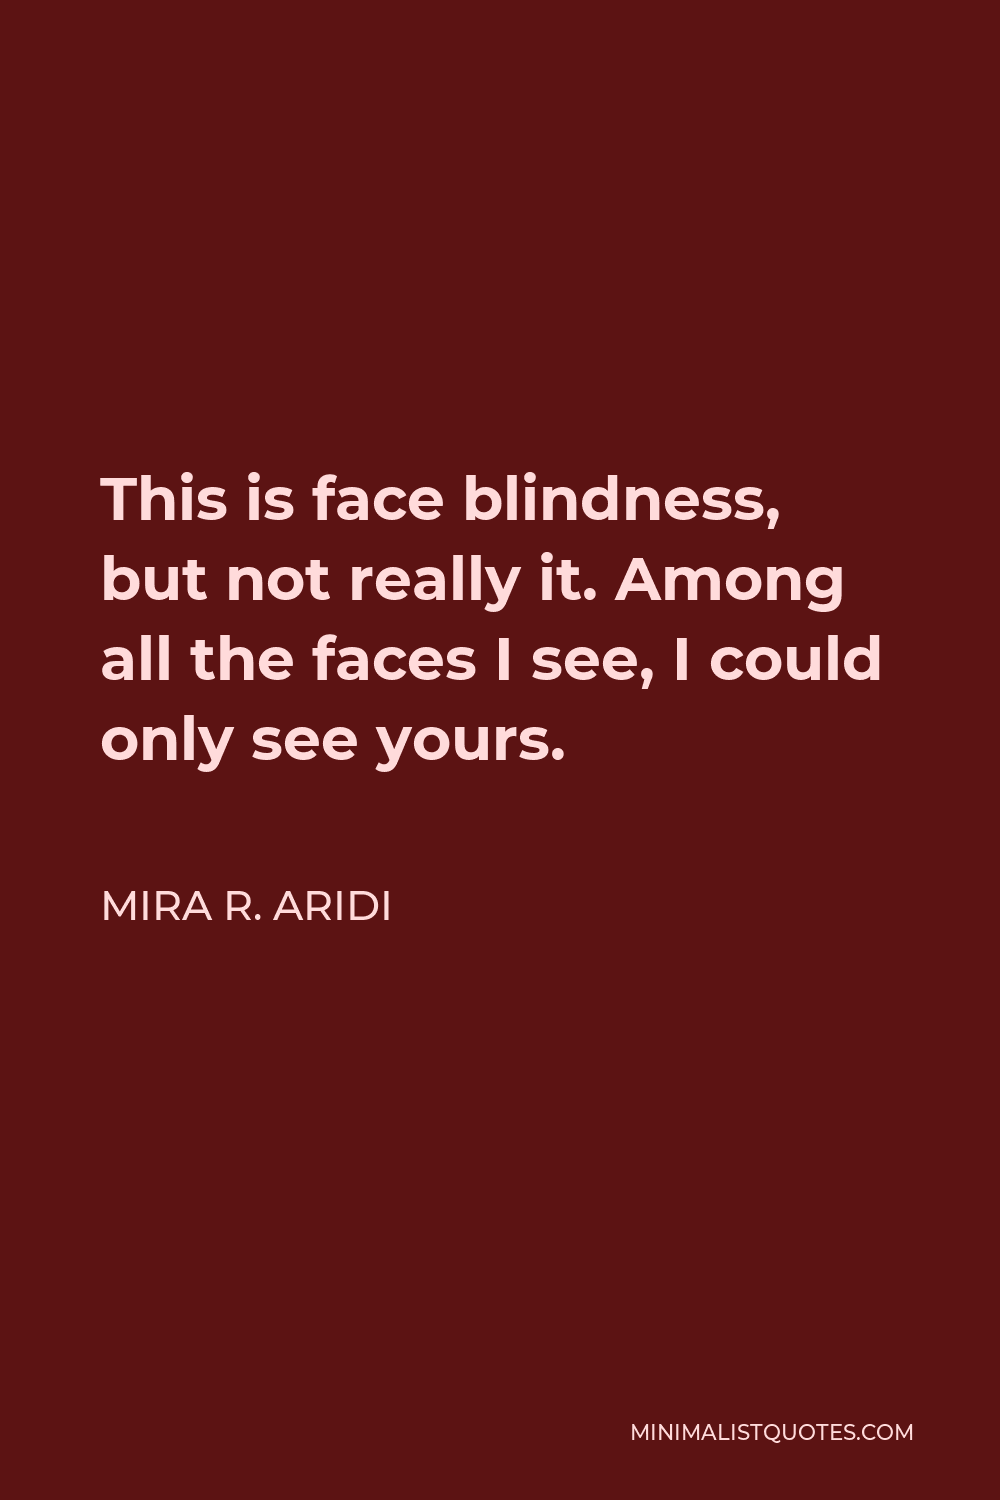 Mira R. Aridi Quote - This is face blindness, but not really it. Among all the faces I see, I could only see yours.